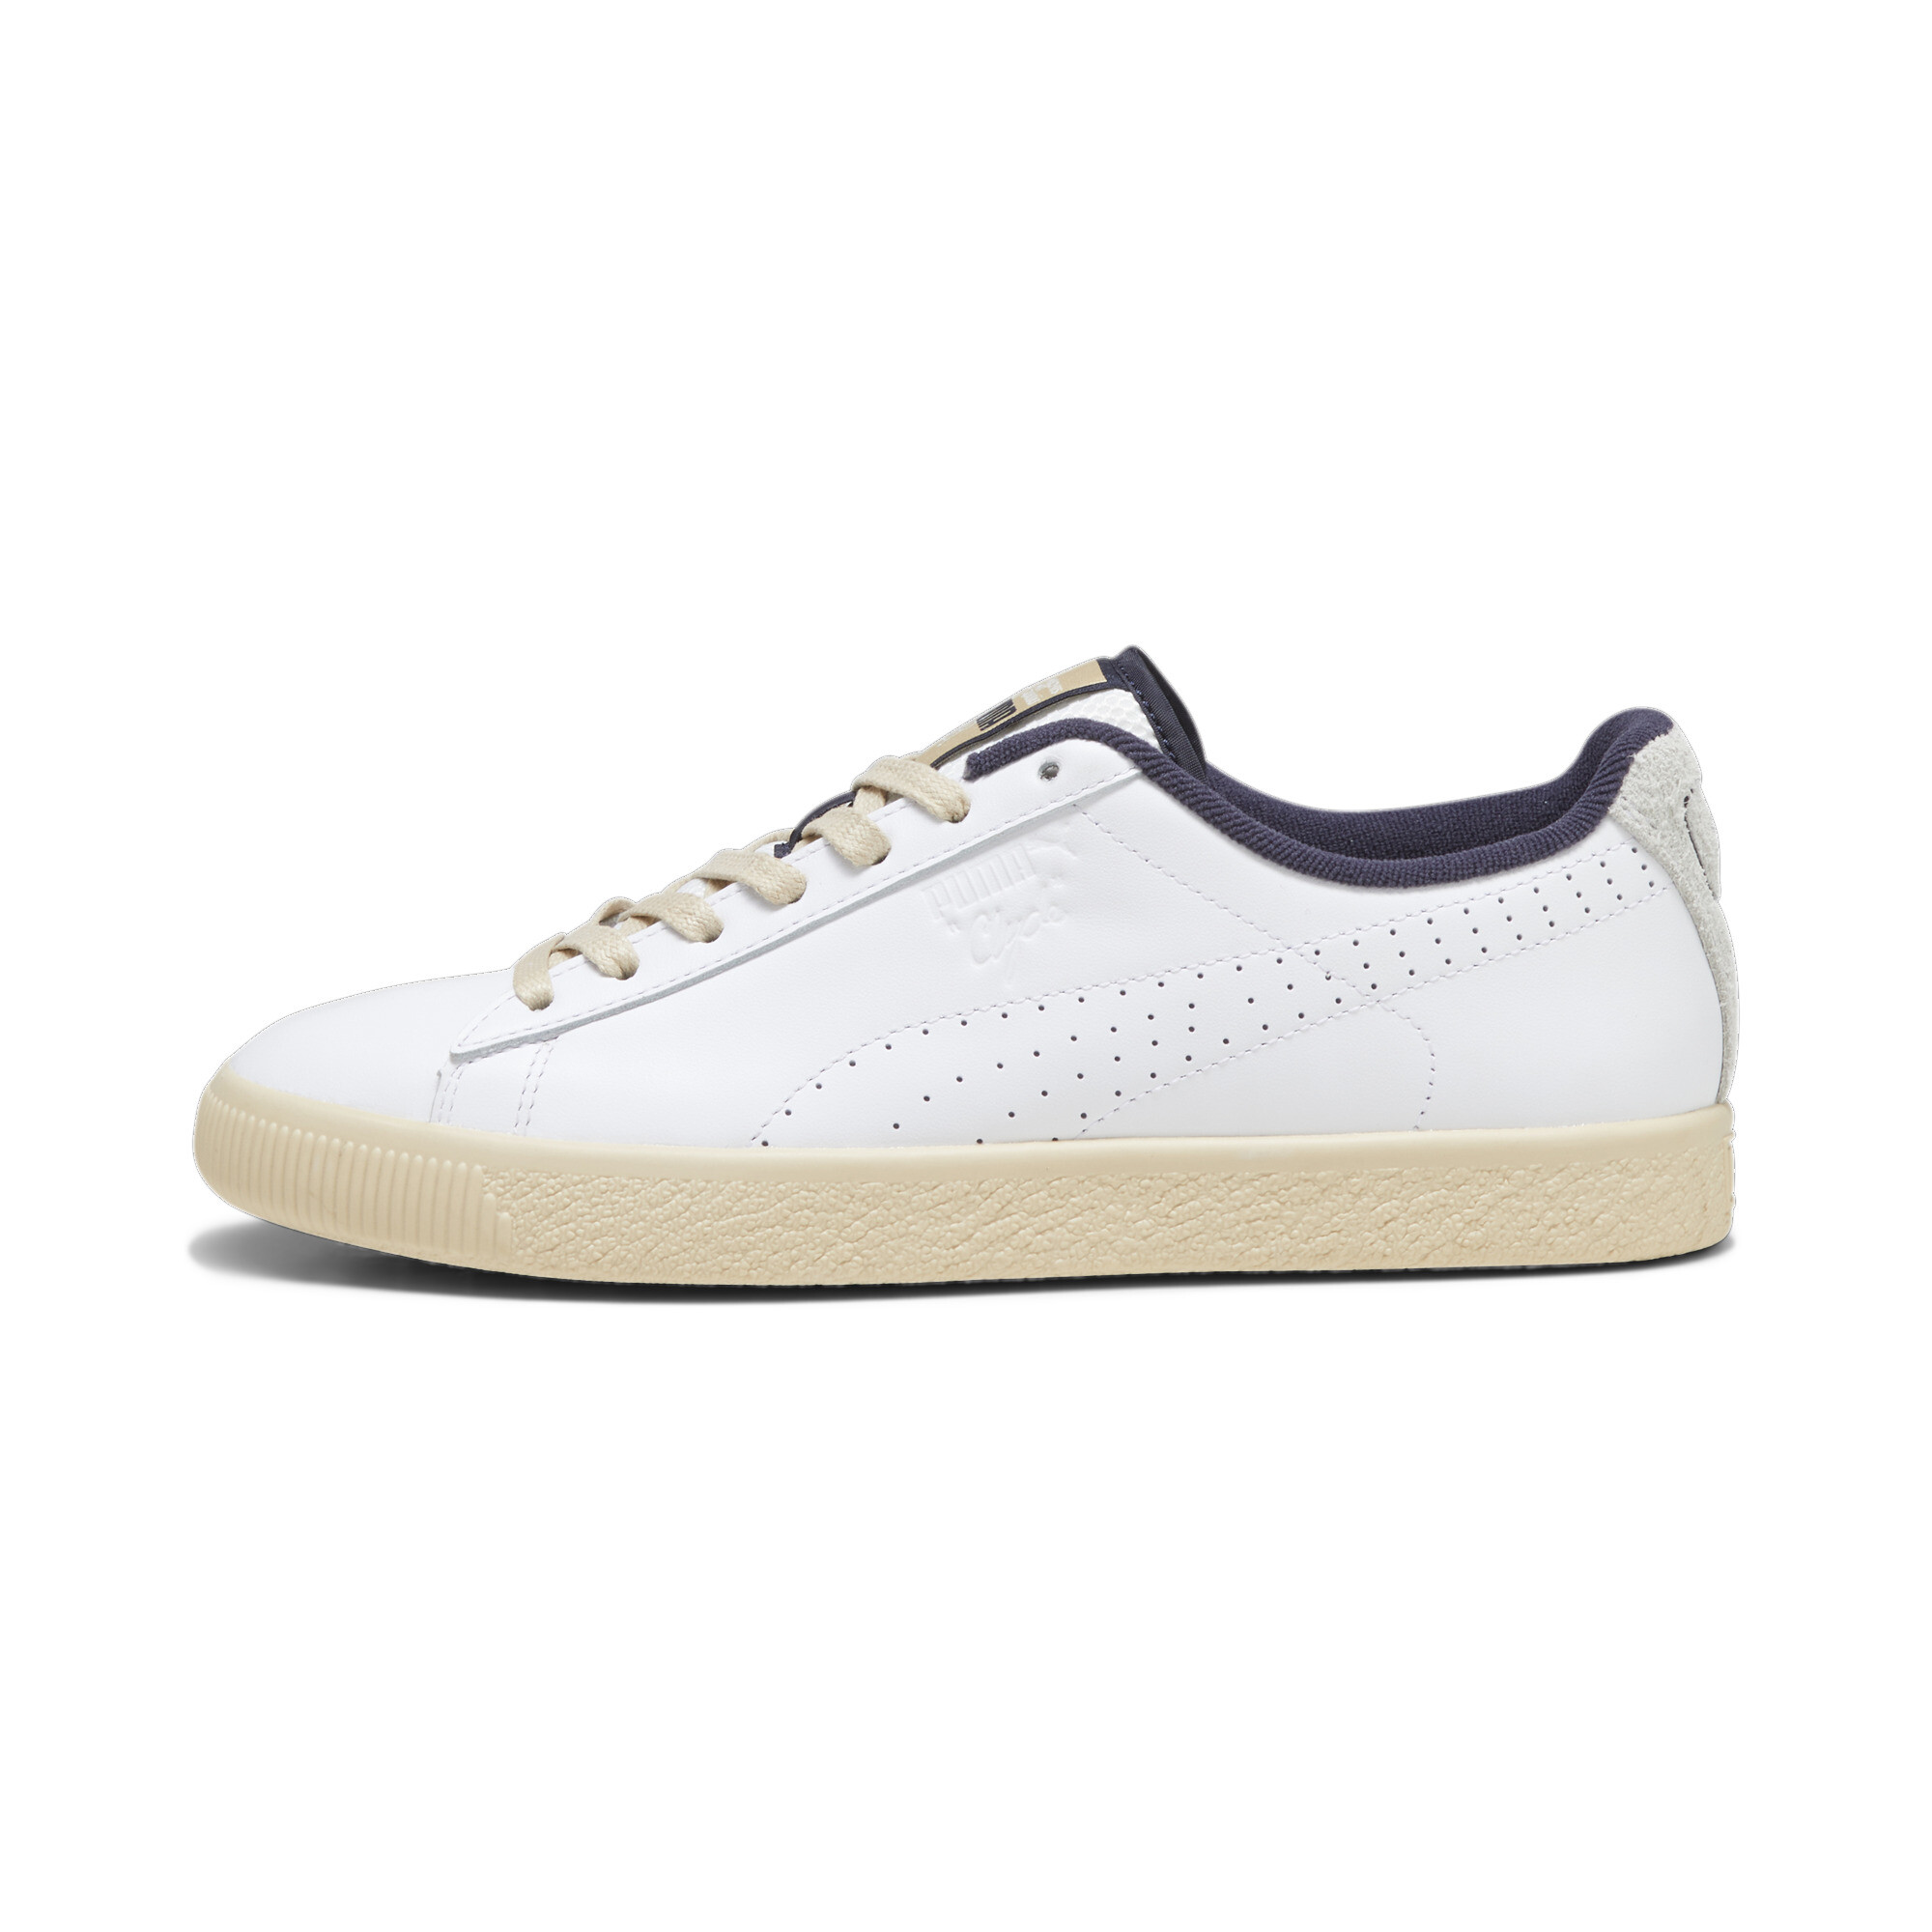 Puma MMQ Service Line Clyde Sneakers, White, Size 41, Shoes